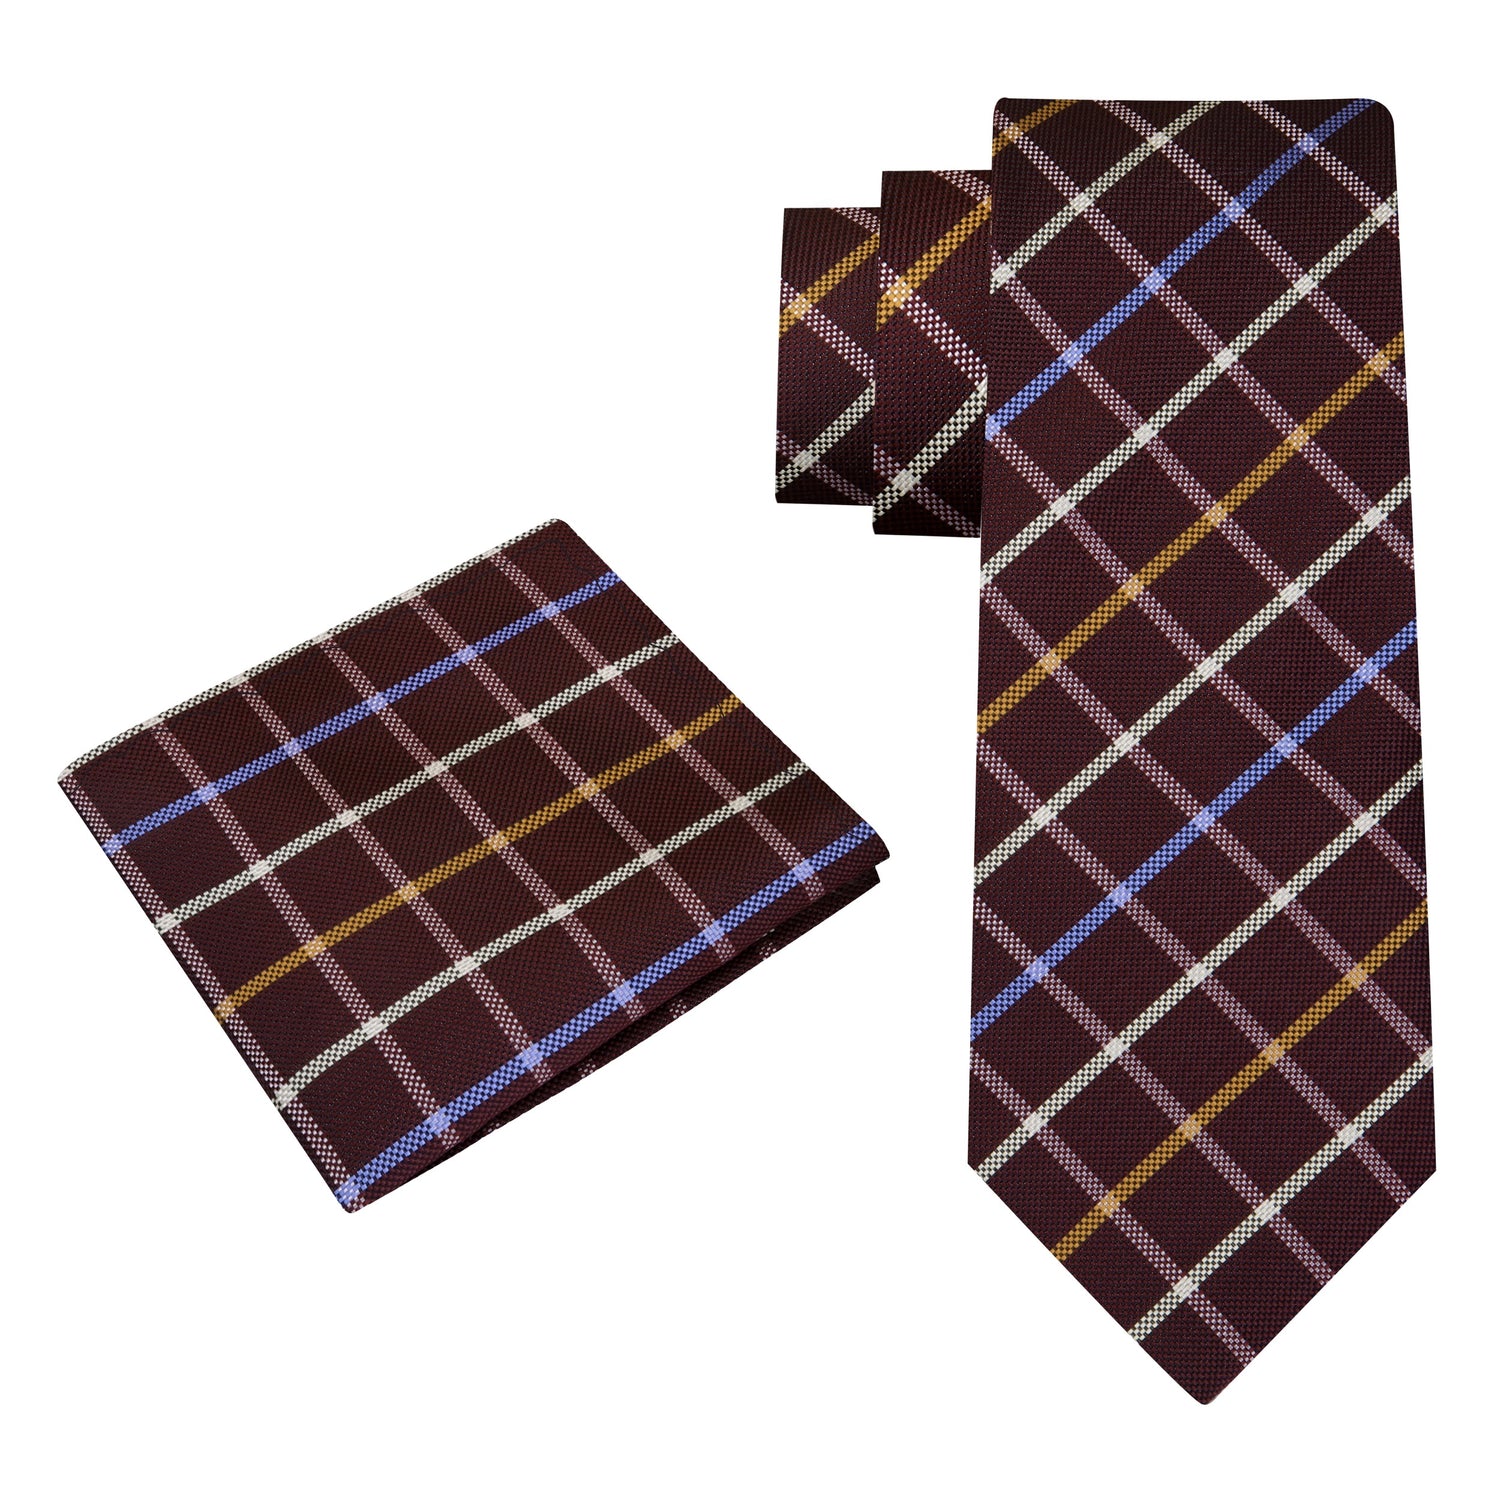 Alt View: A Mahogany, Brown, Cream With Geometric Diamond Pattern And Small Checks Pattern Silk Necktie With Matching Pocket Square